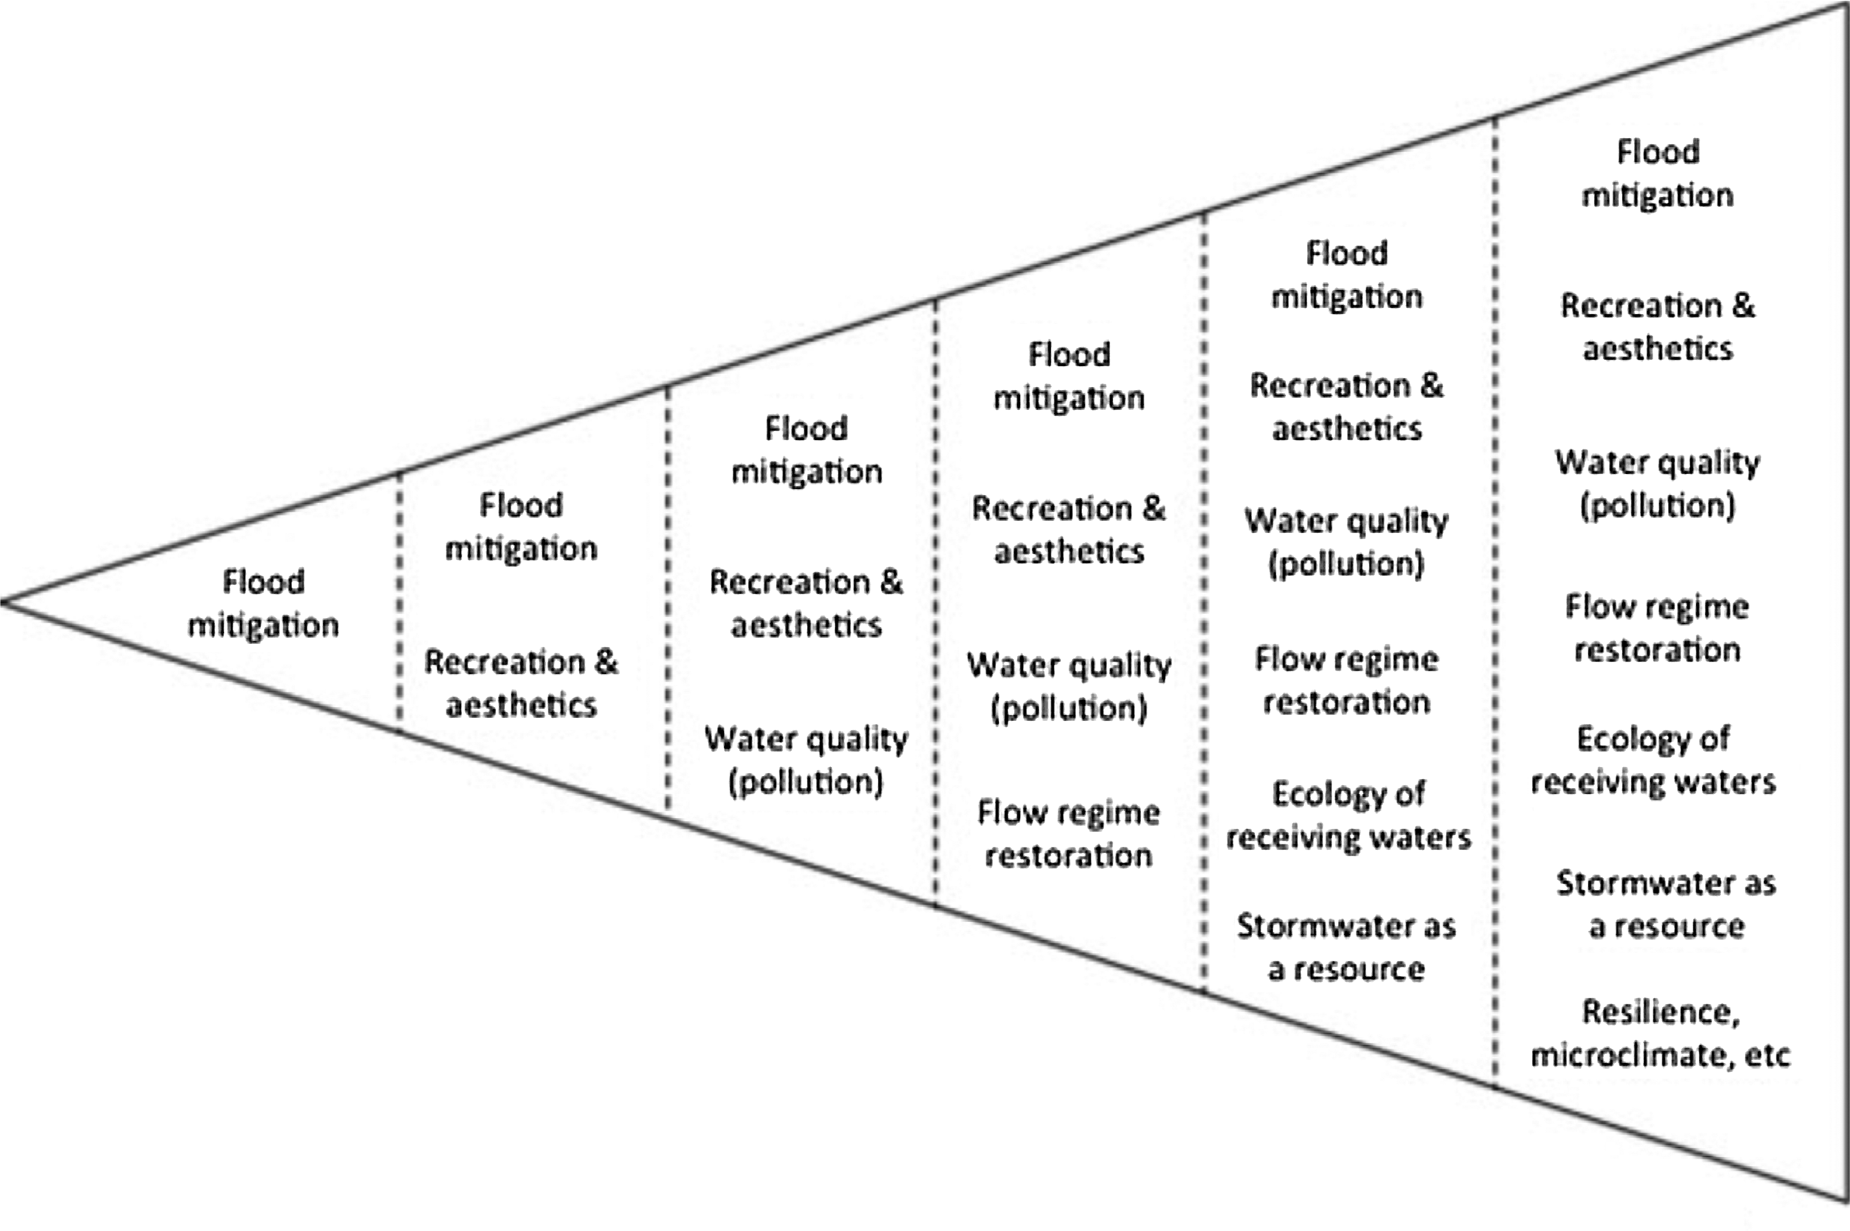 A scheme of the development of flood resilience facilities